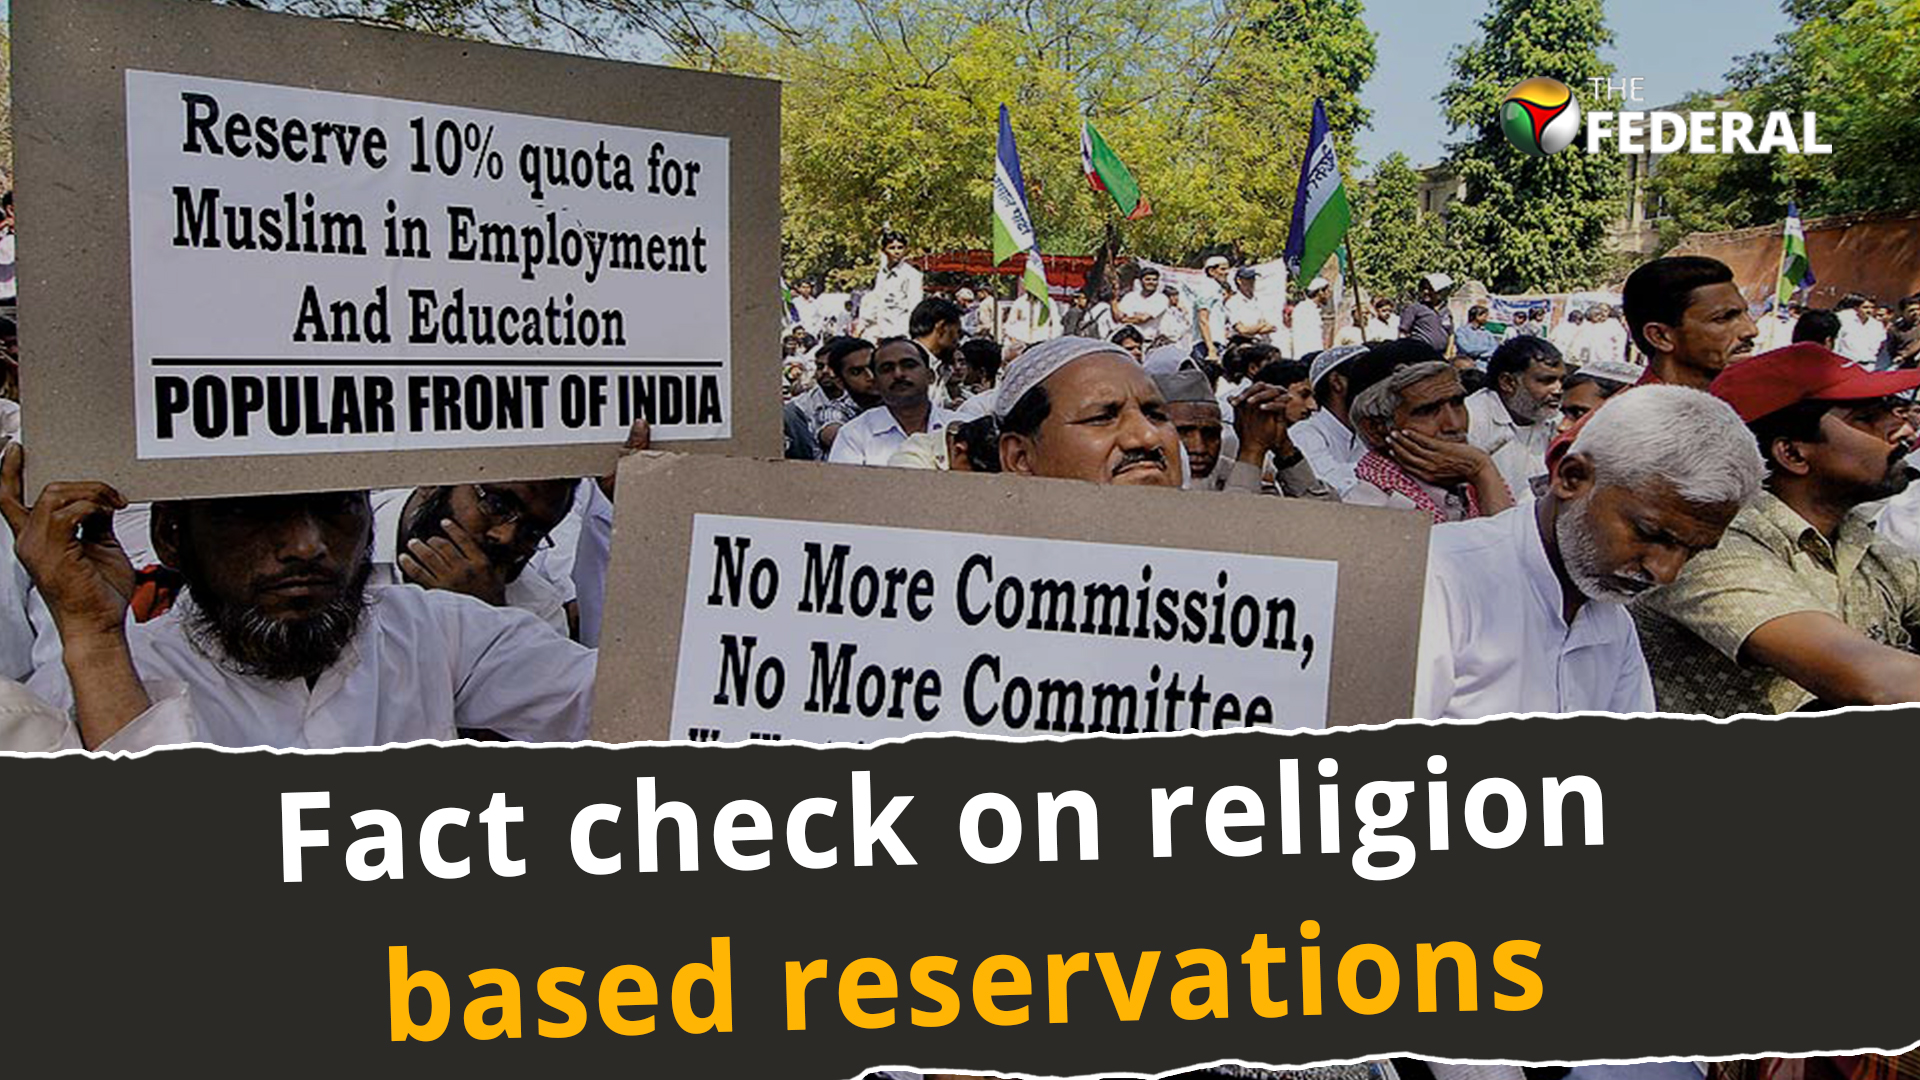 Fact check on religion based reservations